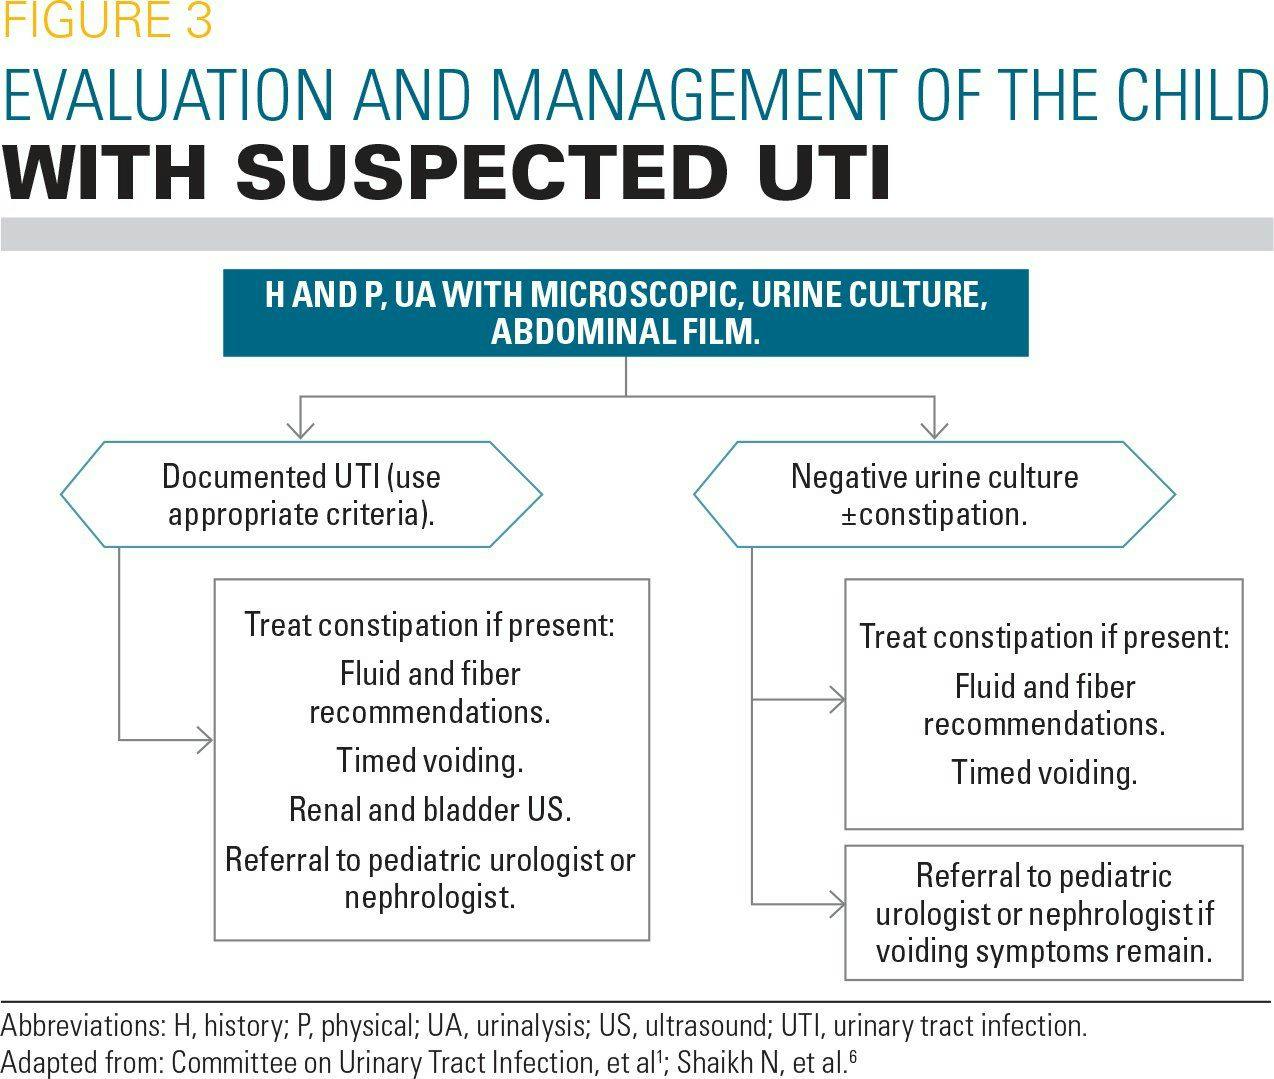 Evaluation and management of the child with suspected UTI